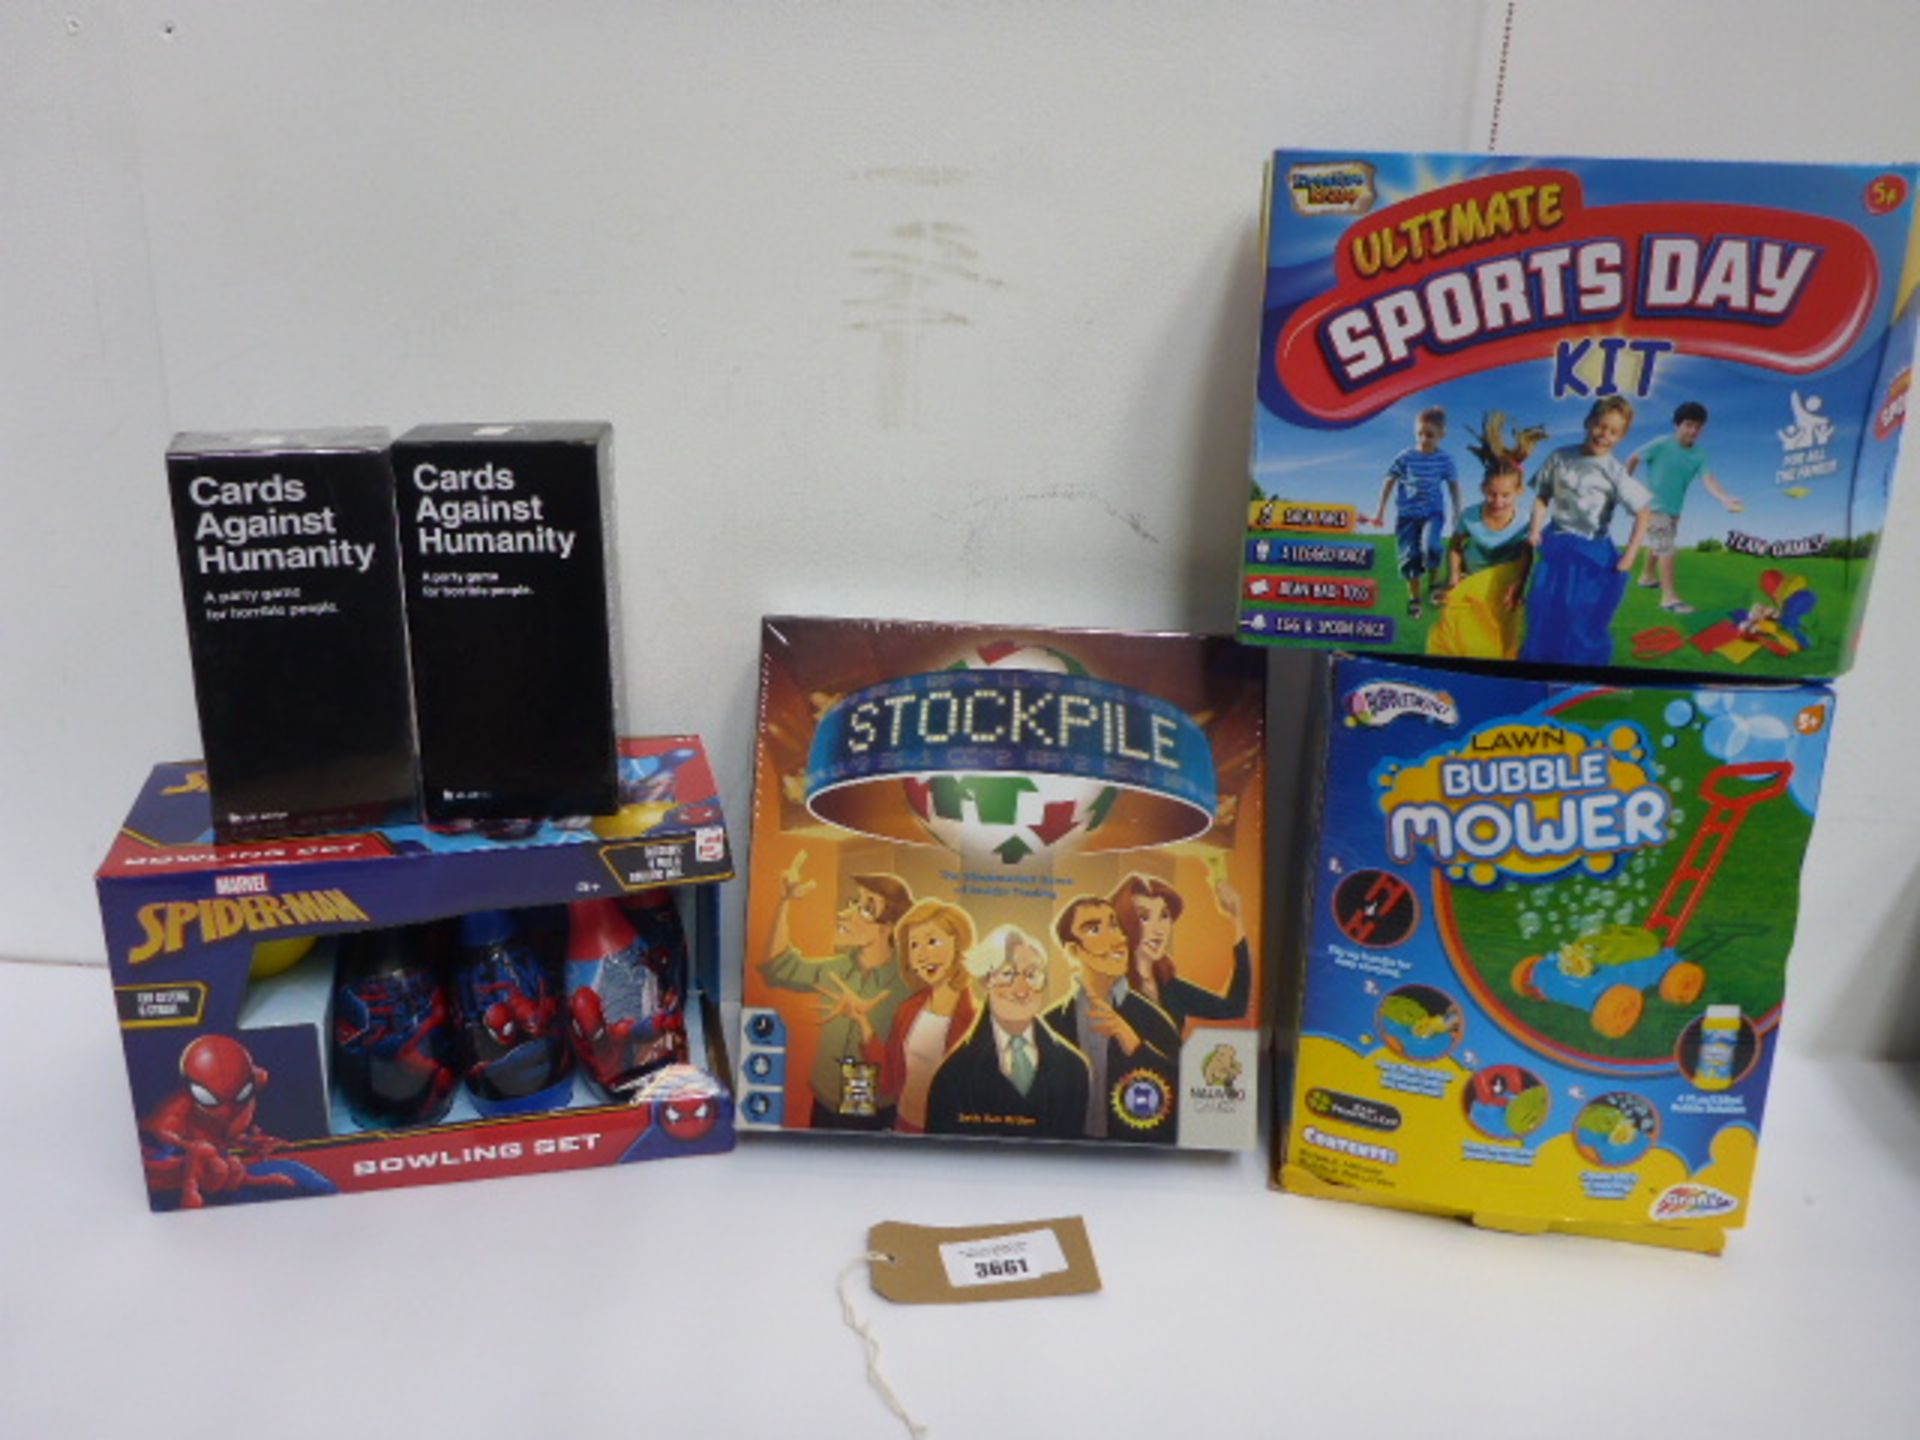 2 x Cards Against Humanity, Spider-man bowling set, Stockpile board game, Bubble Mower and